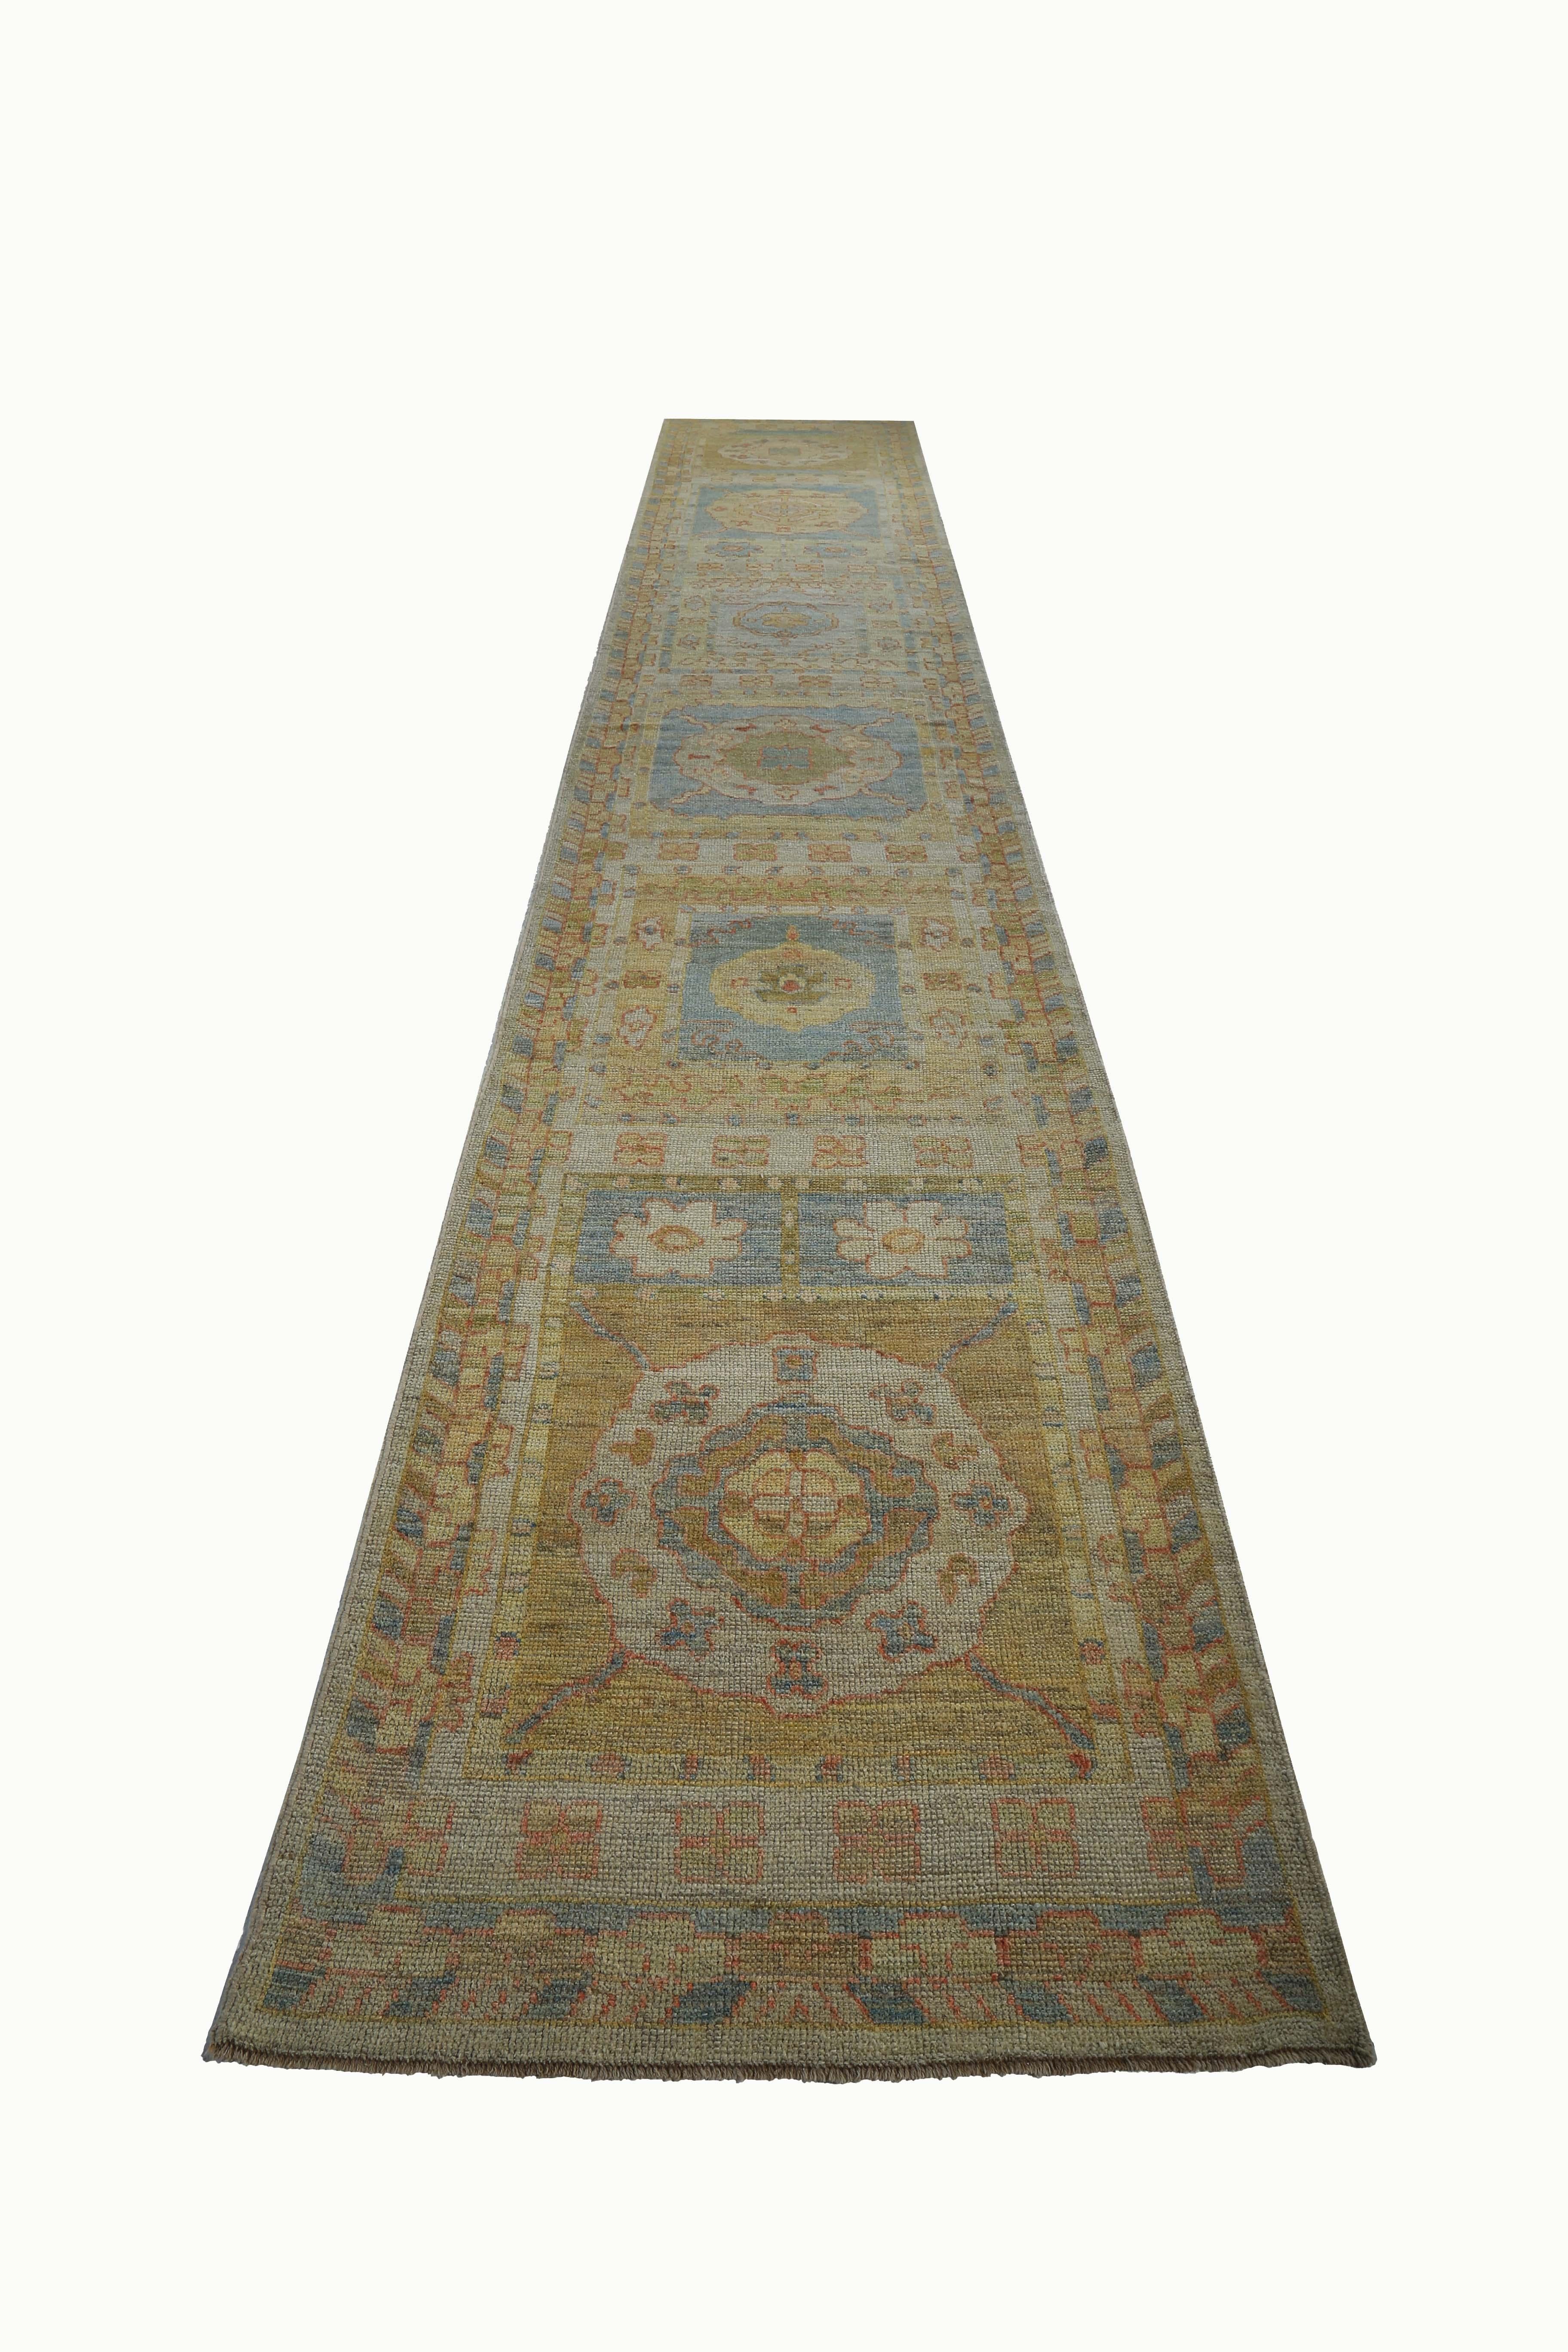 New Turkish rug made of handwoven sheep’s wool of the finest quality. It’s colored with organic vegetable dyes that are certified safe for humans and pets alike. It features floral details in blue and green over a yellow field. Flower patterns are